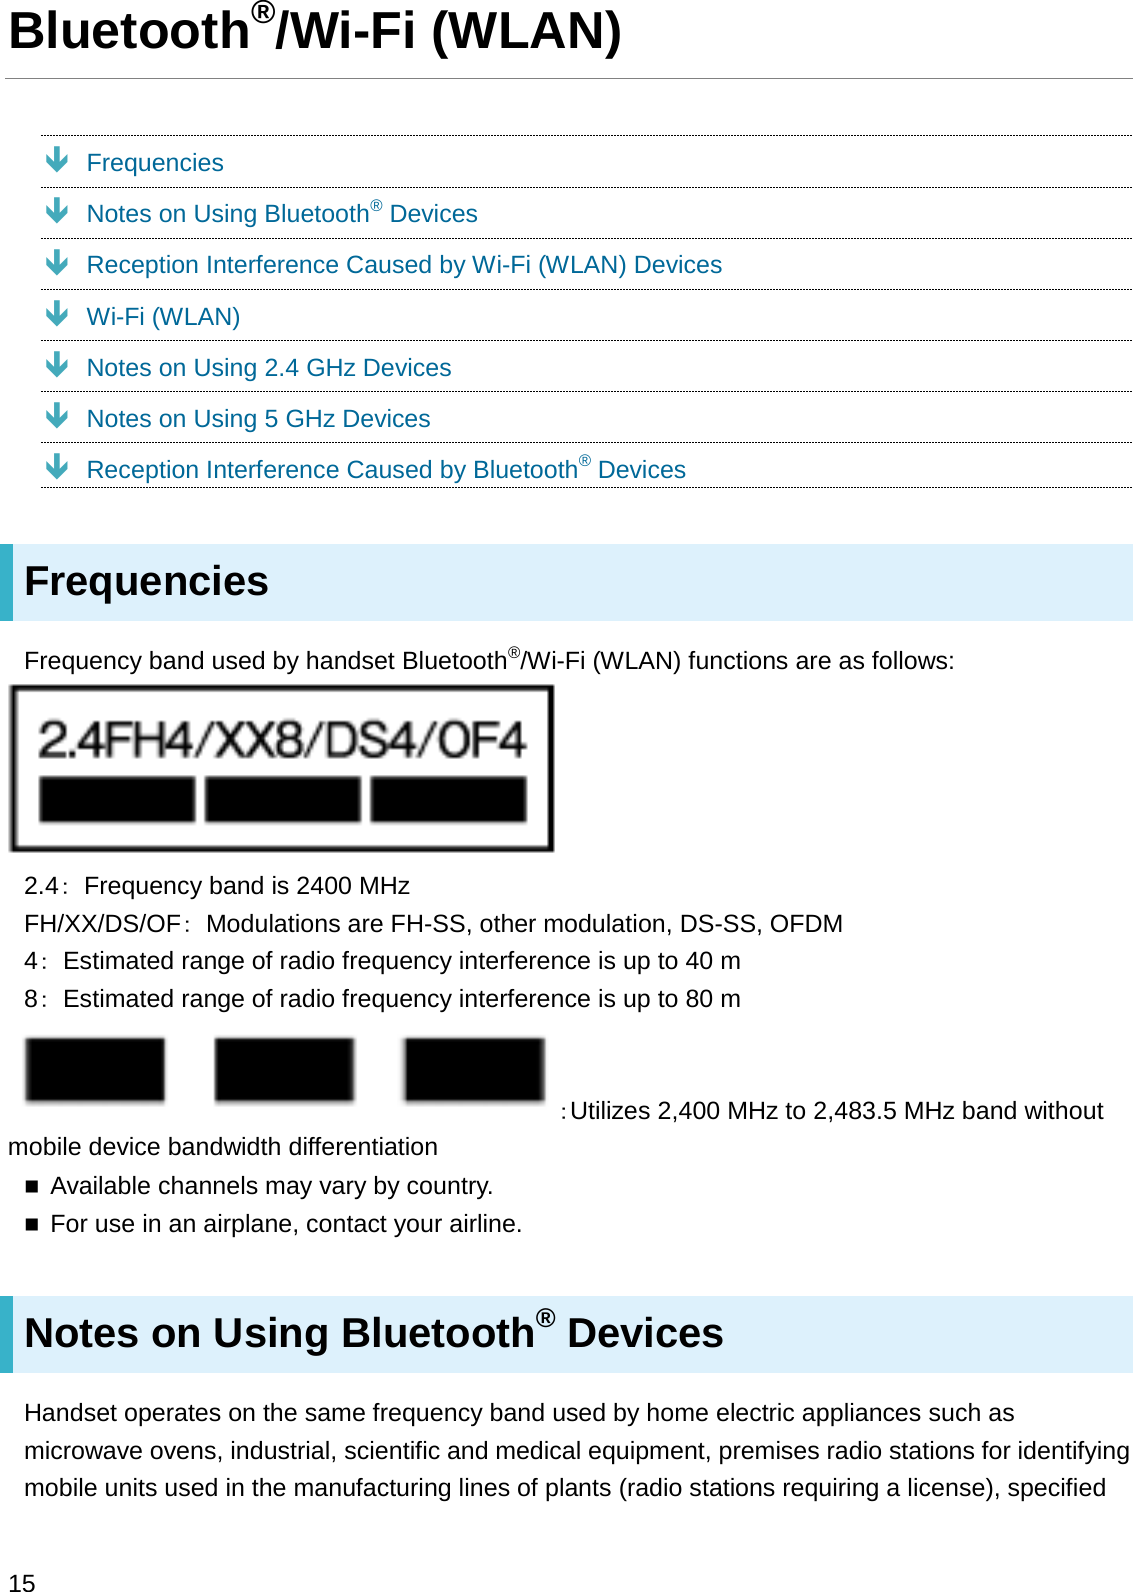 Bluetooth®/Wi-Fi (WLAN)ÐFrequenciesÐNotes on Using Bluetooth®DevicesÐReception Interference Caused by Wi-Fi (WLAN) DevicesÐWi-Fi (WLAN)ÐNotes on Using 2.4 GHz DevicesÐNotes on Using 5 GHz DevicesÐReception Interference Caused by Bluetooth®DevicesFrequenciesFrequency band used by handset Bluetooth®/Wi-Fi (WLAN) functions are as follows:2.4䠖Frequency band is 2400 MHzFH/XX/DS/OF䠖Modulations are FH-SS, other modulation, DS-SS, OFDM4䠖Estimated range of radio frequency interference is up to 40 m8䠖Estimated range of radio frequency interference is up to 80 m䠖Utilizes 2,400 MHz to 2,483.5 MHz band without mobile device bandwidth differentiationAvailable channels may vary by country.For use in an airplane, contact your airline.Notes on Using Bluetooth®DevicesHandset operates on the same frequency band used by home electric appliances such as microwave ovens, industrial, scientific and medical equipment, premises radio stations for identifying mobile units used in the manufacturing lines of plants (radio stations requiring a license), specified 15